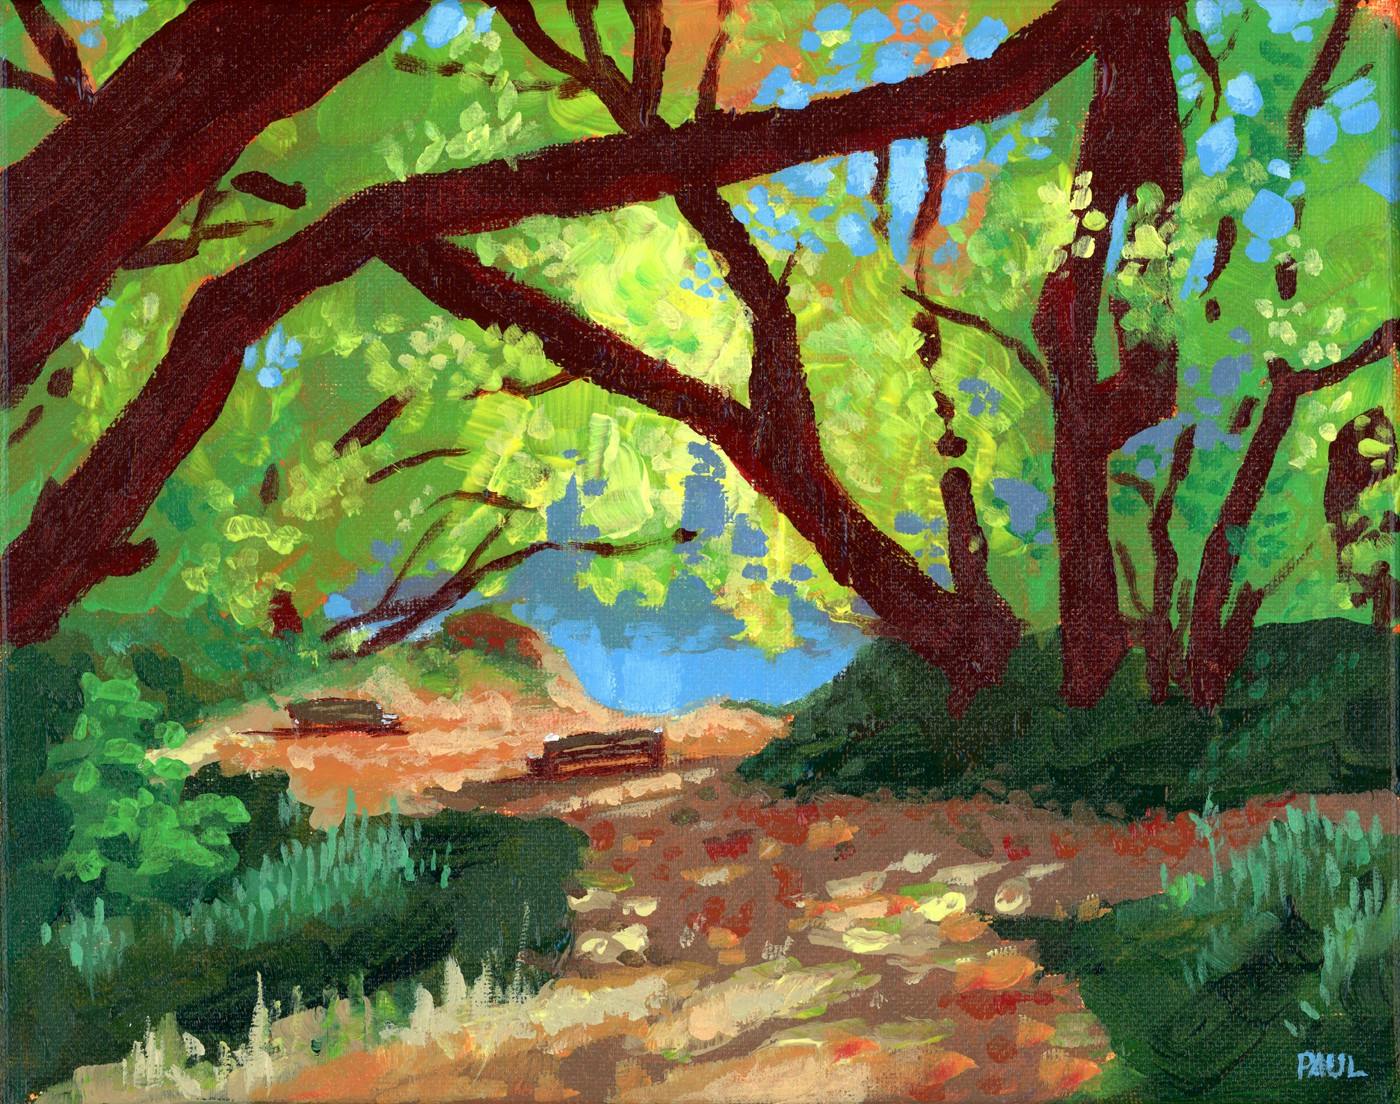 An acrylic painting of two benches overlooking the North Saskatchewan river in a sunlight opening amongst copses of trees delineated by leaf strewn dirt paths.